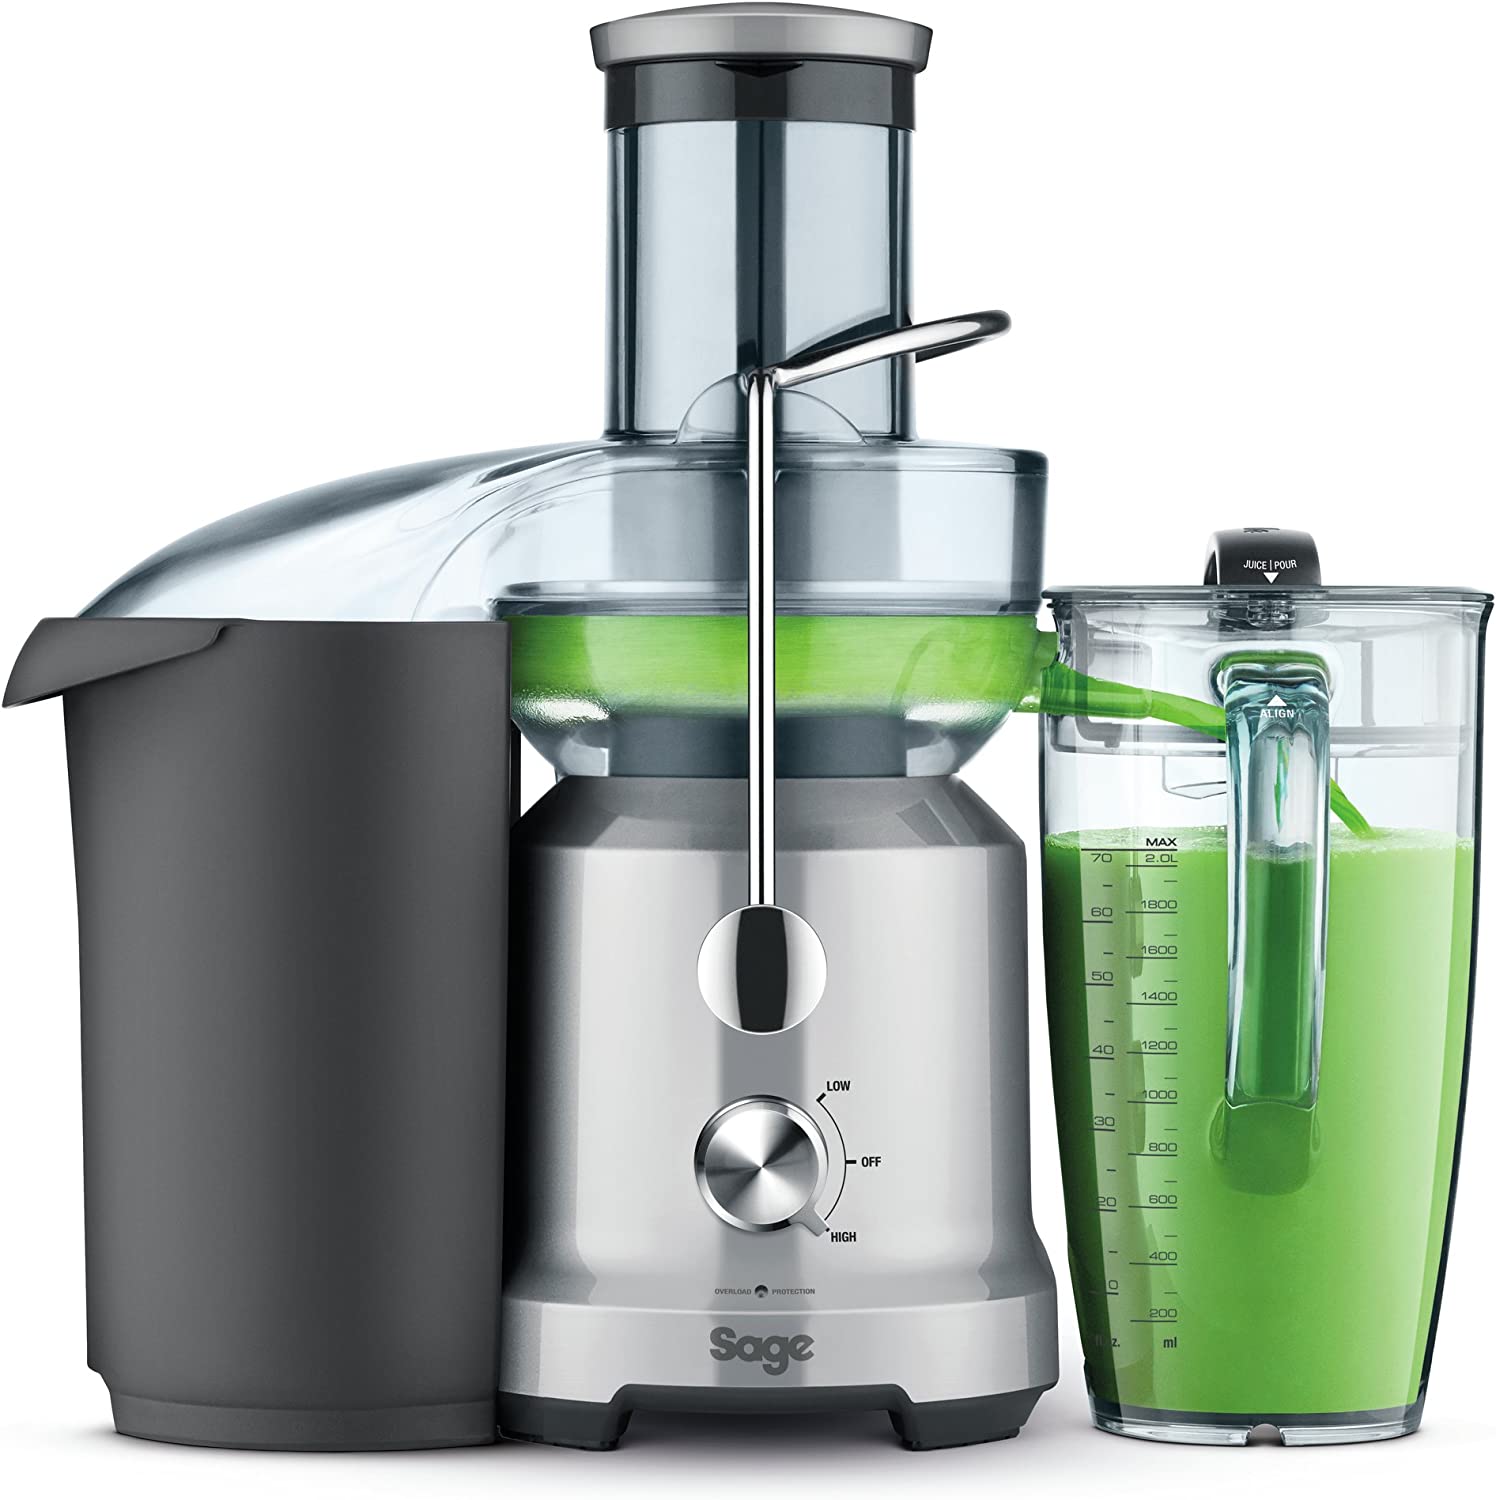 Sage by Heston Blumenthal BJE430SIL the Nutri Juicer Cold Fountain Centrifugal Juicer - Silver - New Model